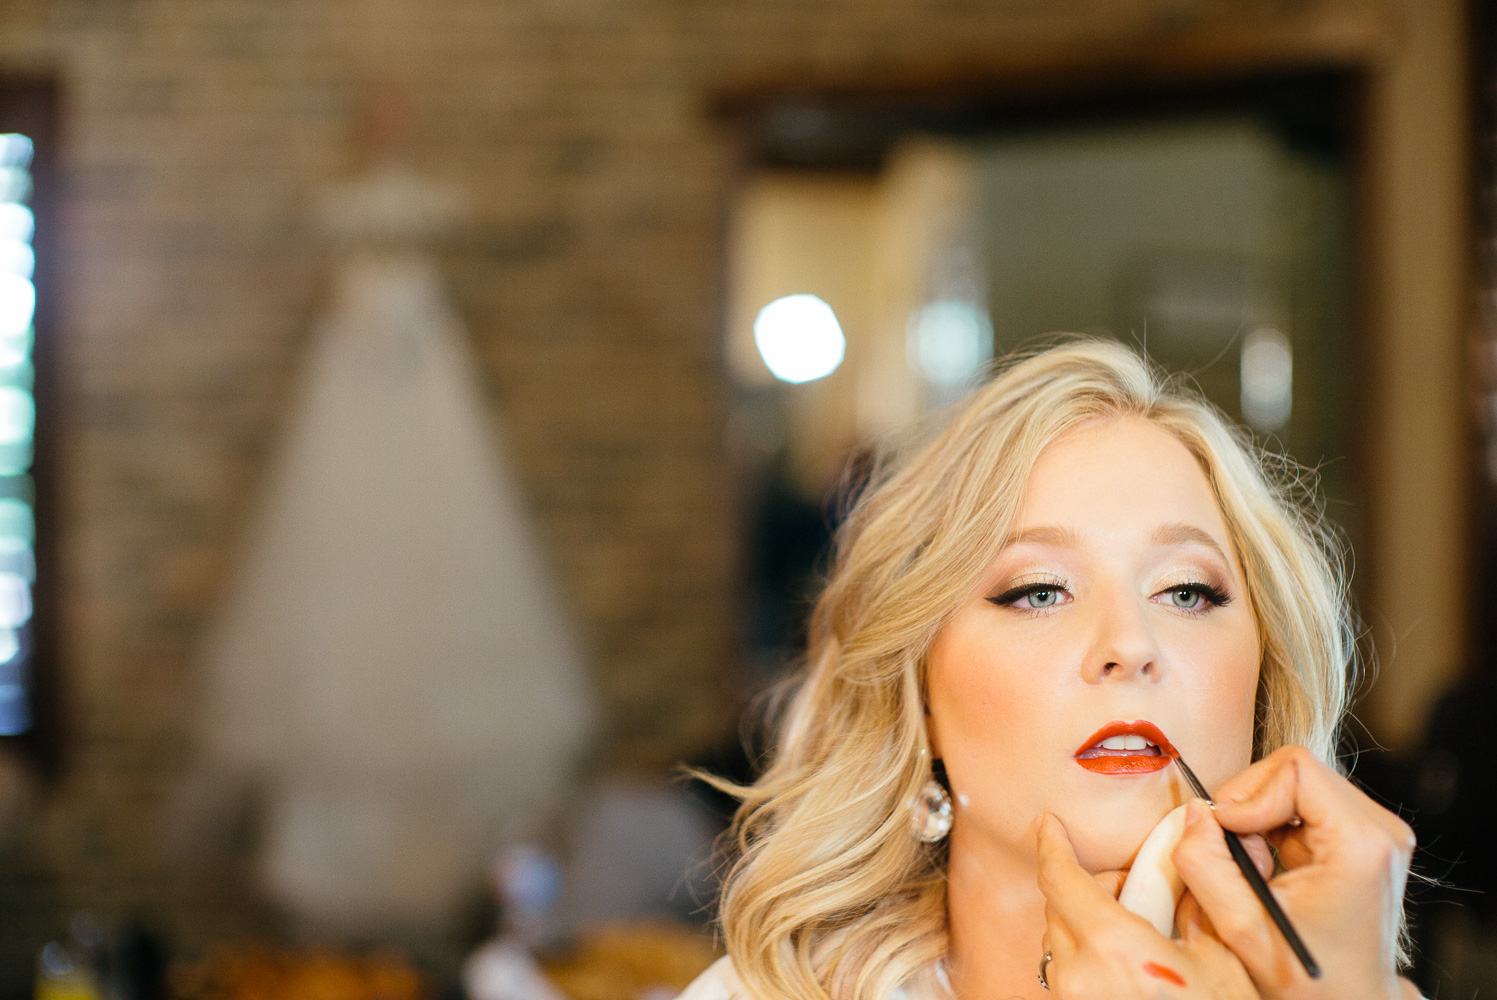 Kailey the bride has makeup applied at Chandelier of Gruene-03